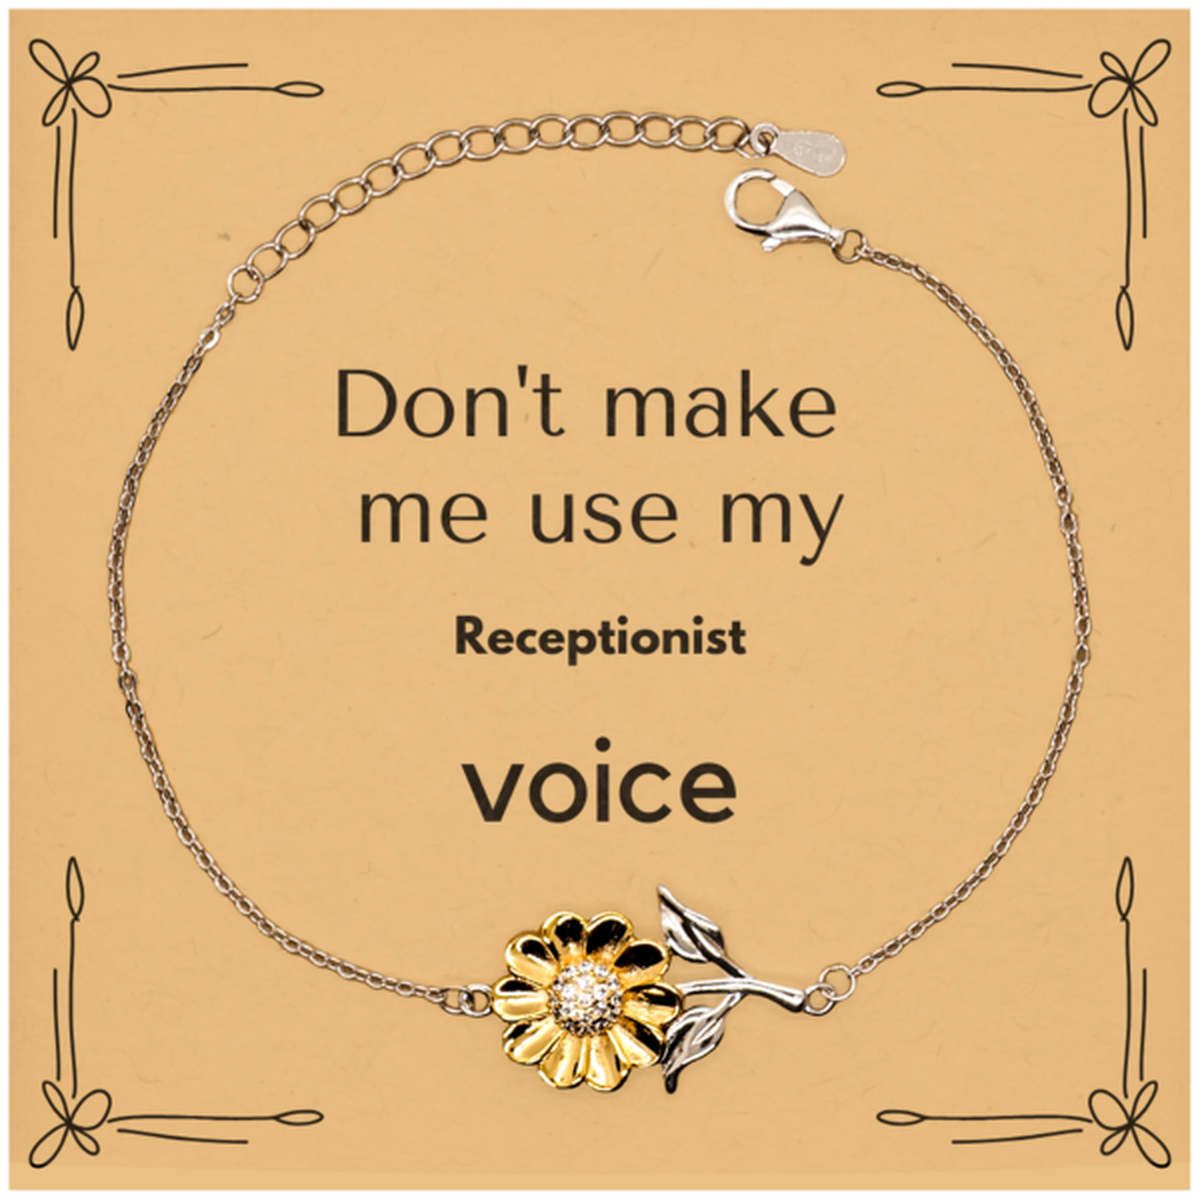 Don't make me use my Receptionist voice, Sarcasm Receptionist Card Gifts, Christmas Receptionist Sunflower Bracelet Birthday Unique Gifts For Receptionist Coworkers, Men, Women, Colleague, Friends